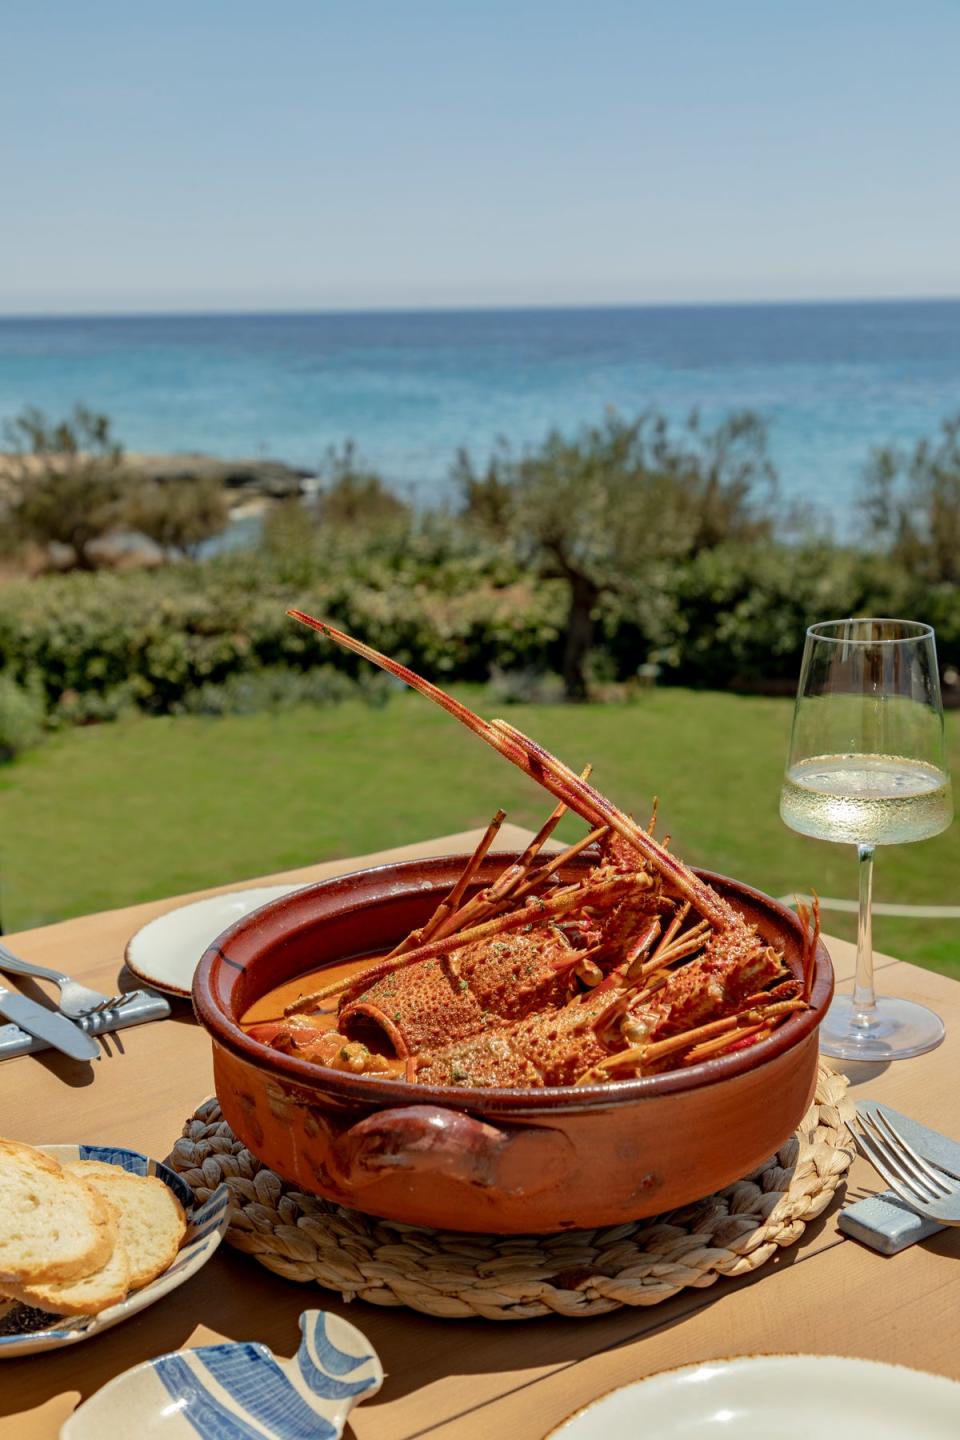 Villa le Blanc’s iconic S’Amarador restaurant has a particular focus on one of the culinary highlights of the Balearic Sea: the local lobster (Gran Meliá)